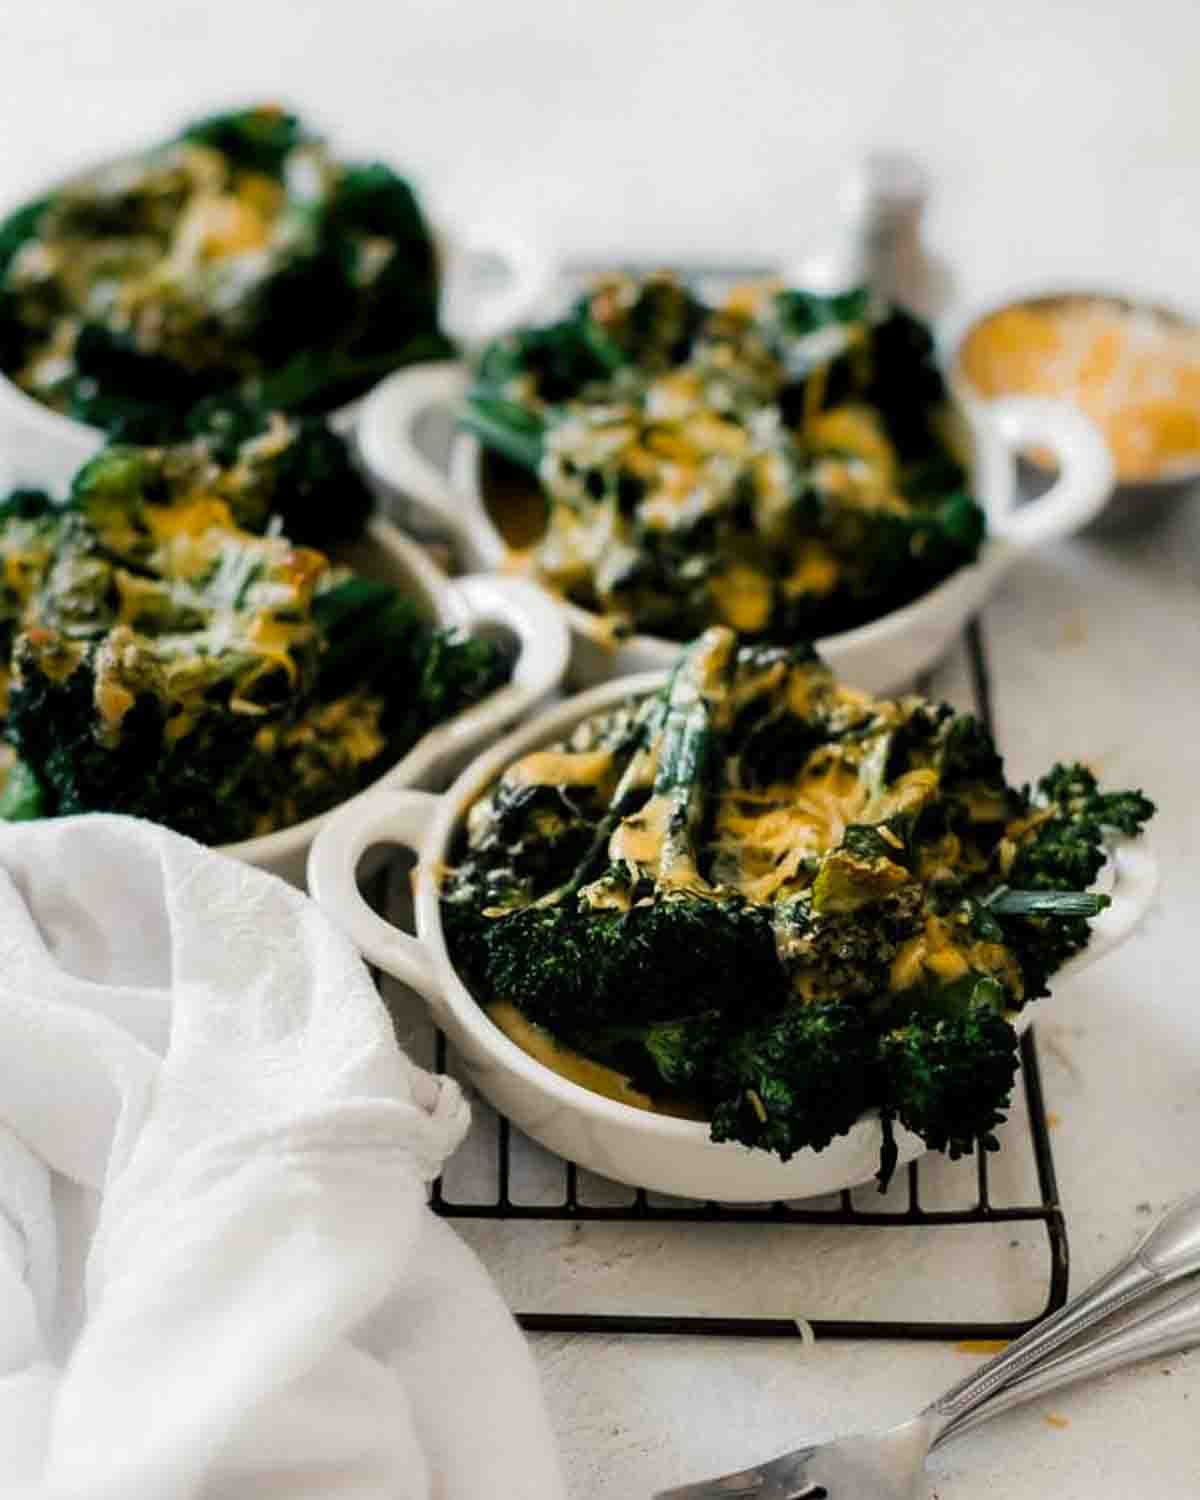 Small dishes of broccoli and cheese sauce on a cooling rack.